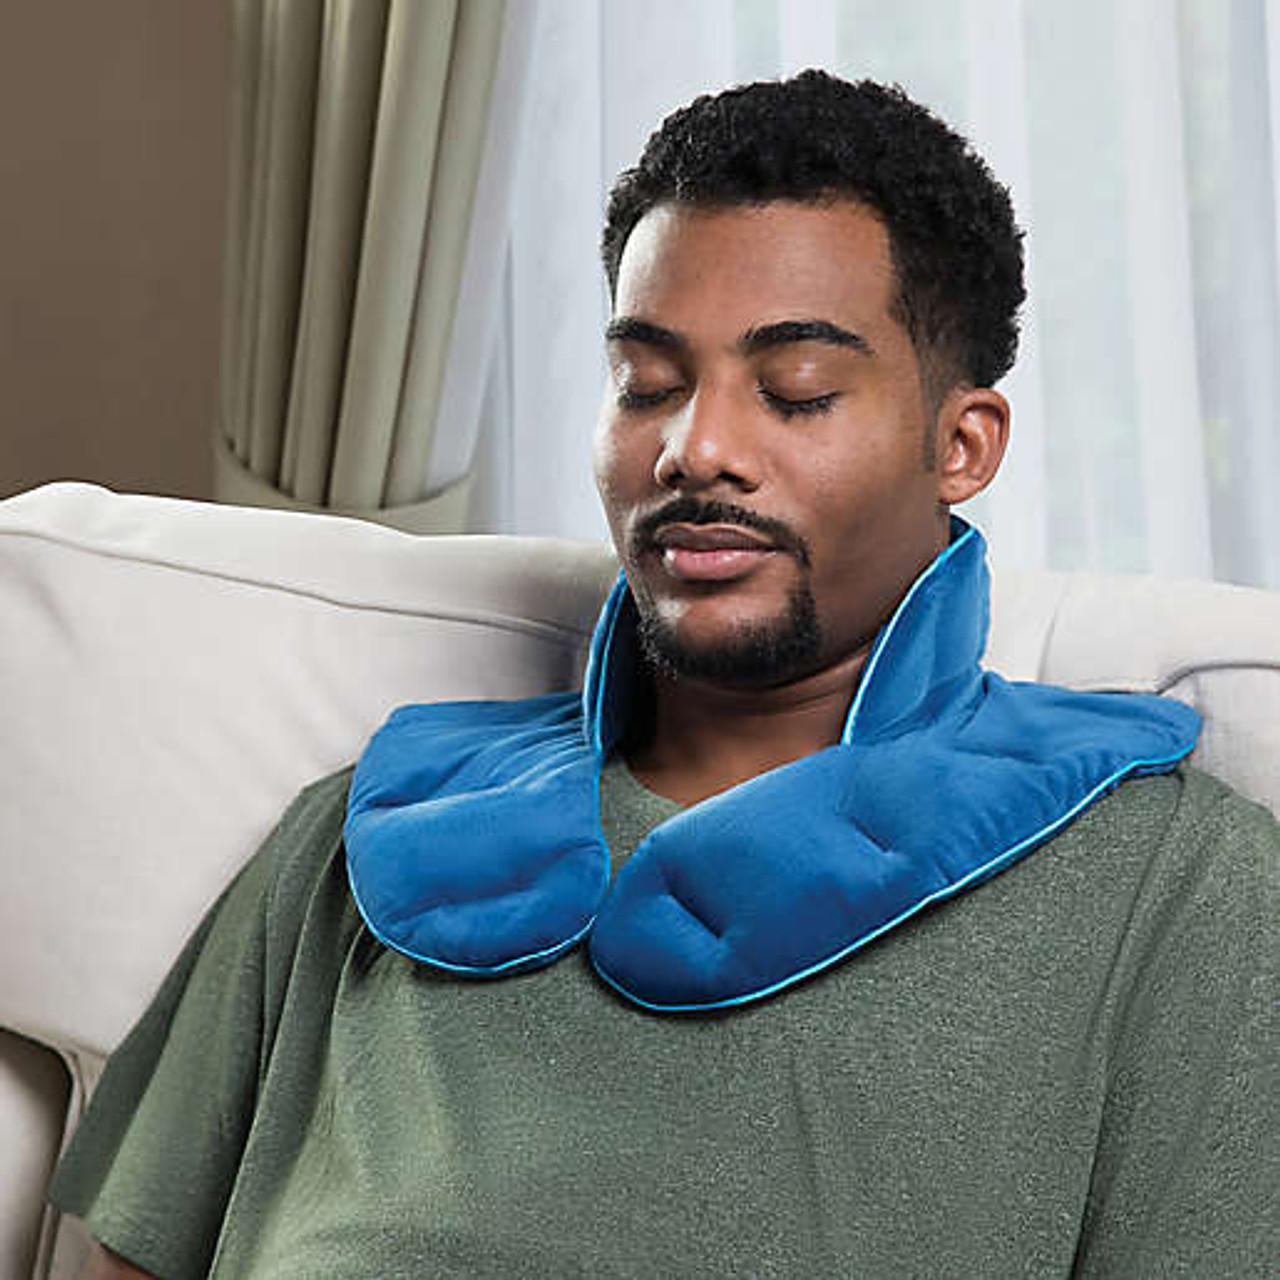 therma neck massager